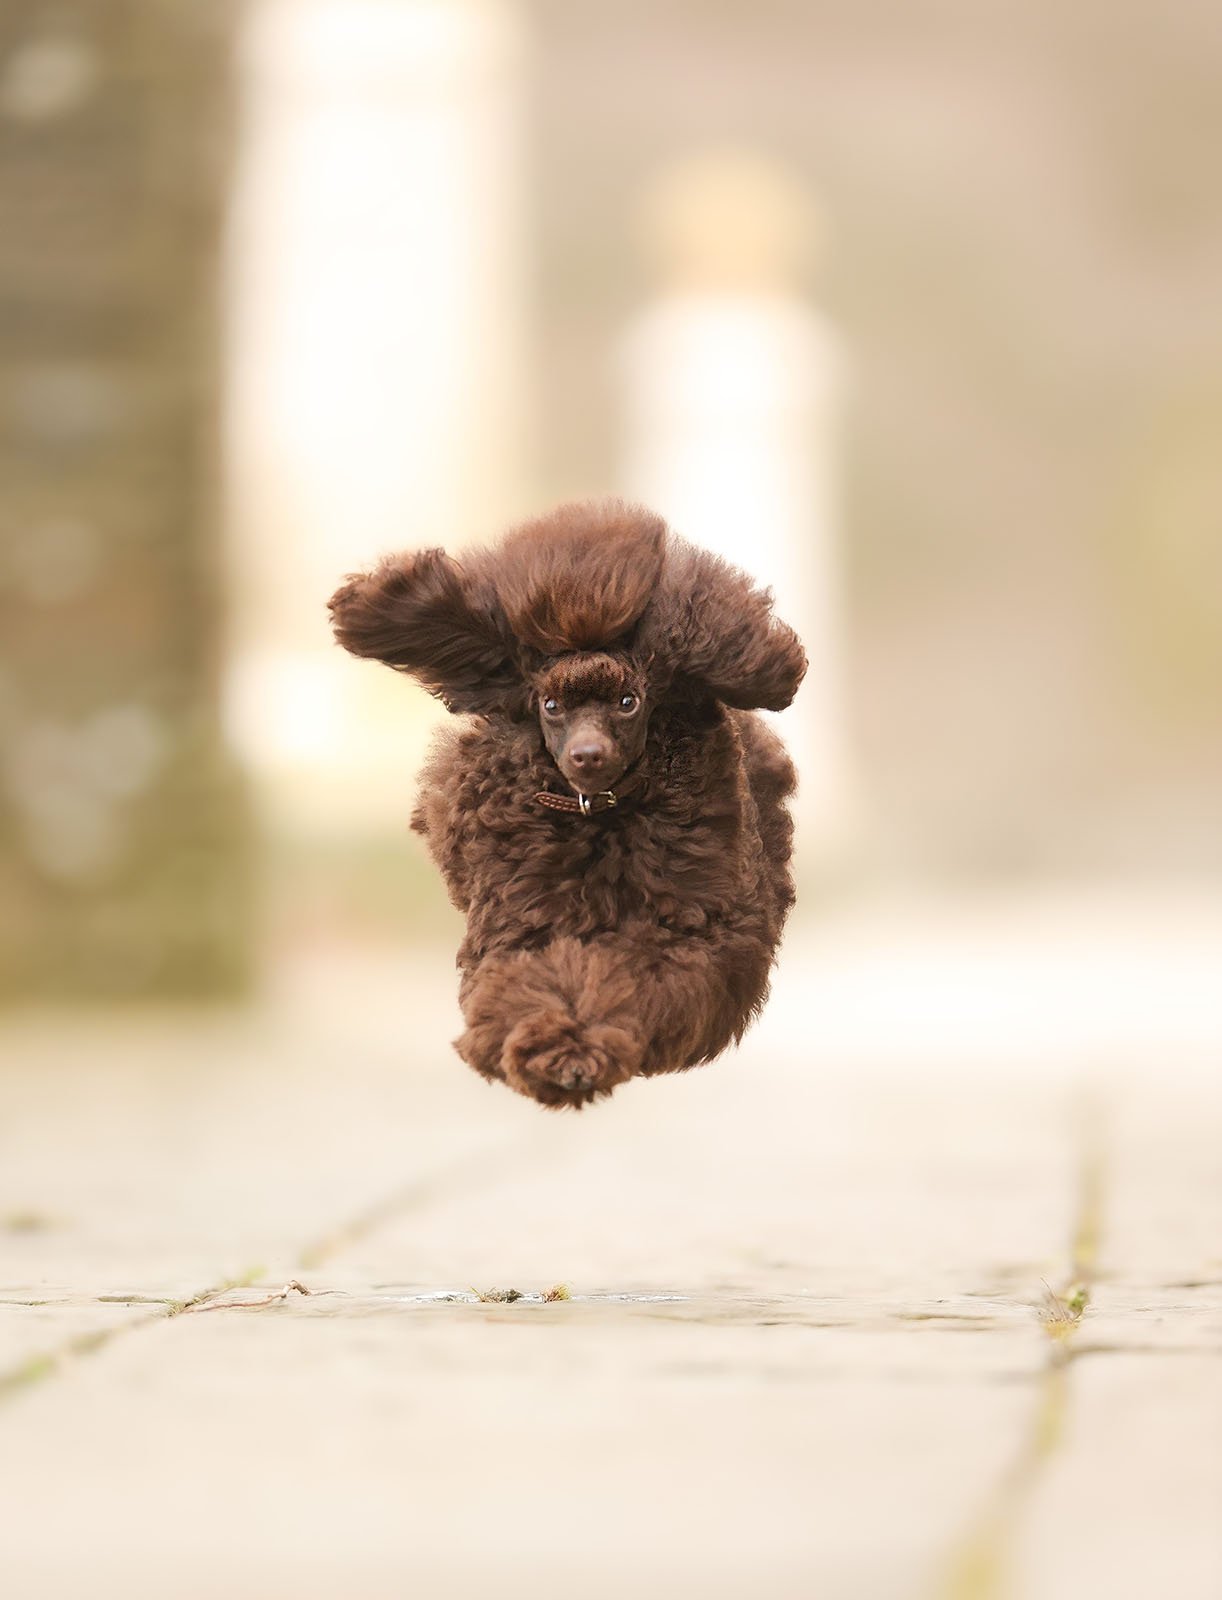 A fluffy brown poodle is captured mid-air while running, its ears flapping and legs tucked in. The background is blurred, putting focus on the energetic and joyful dog.